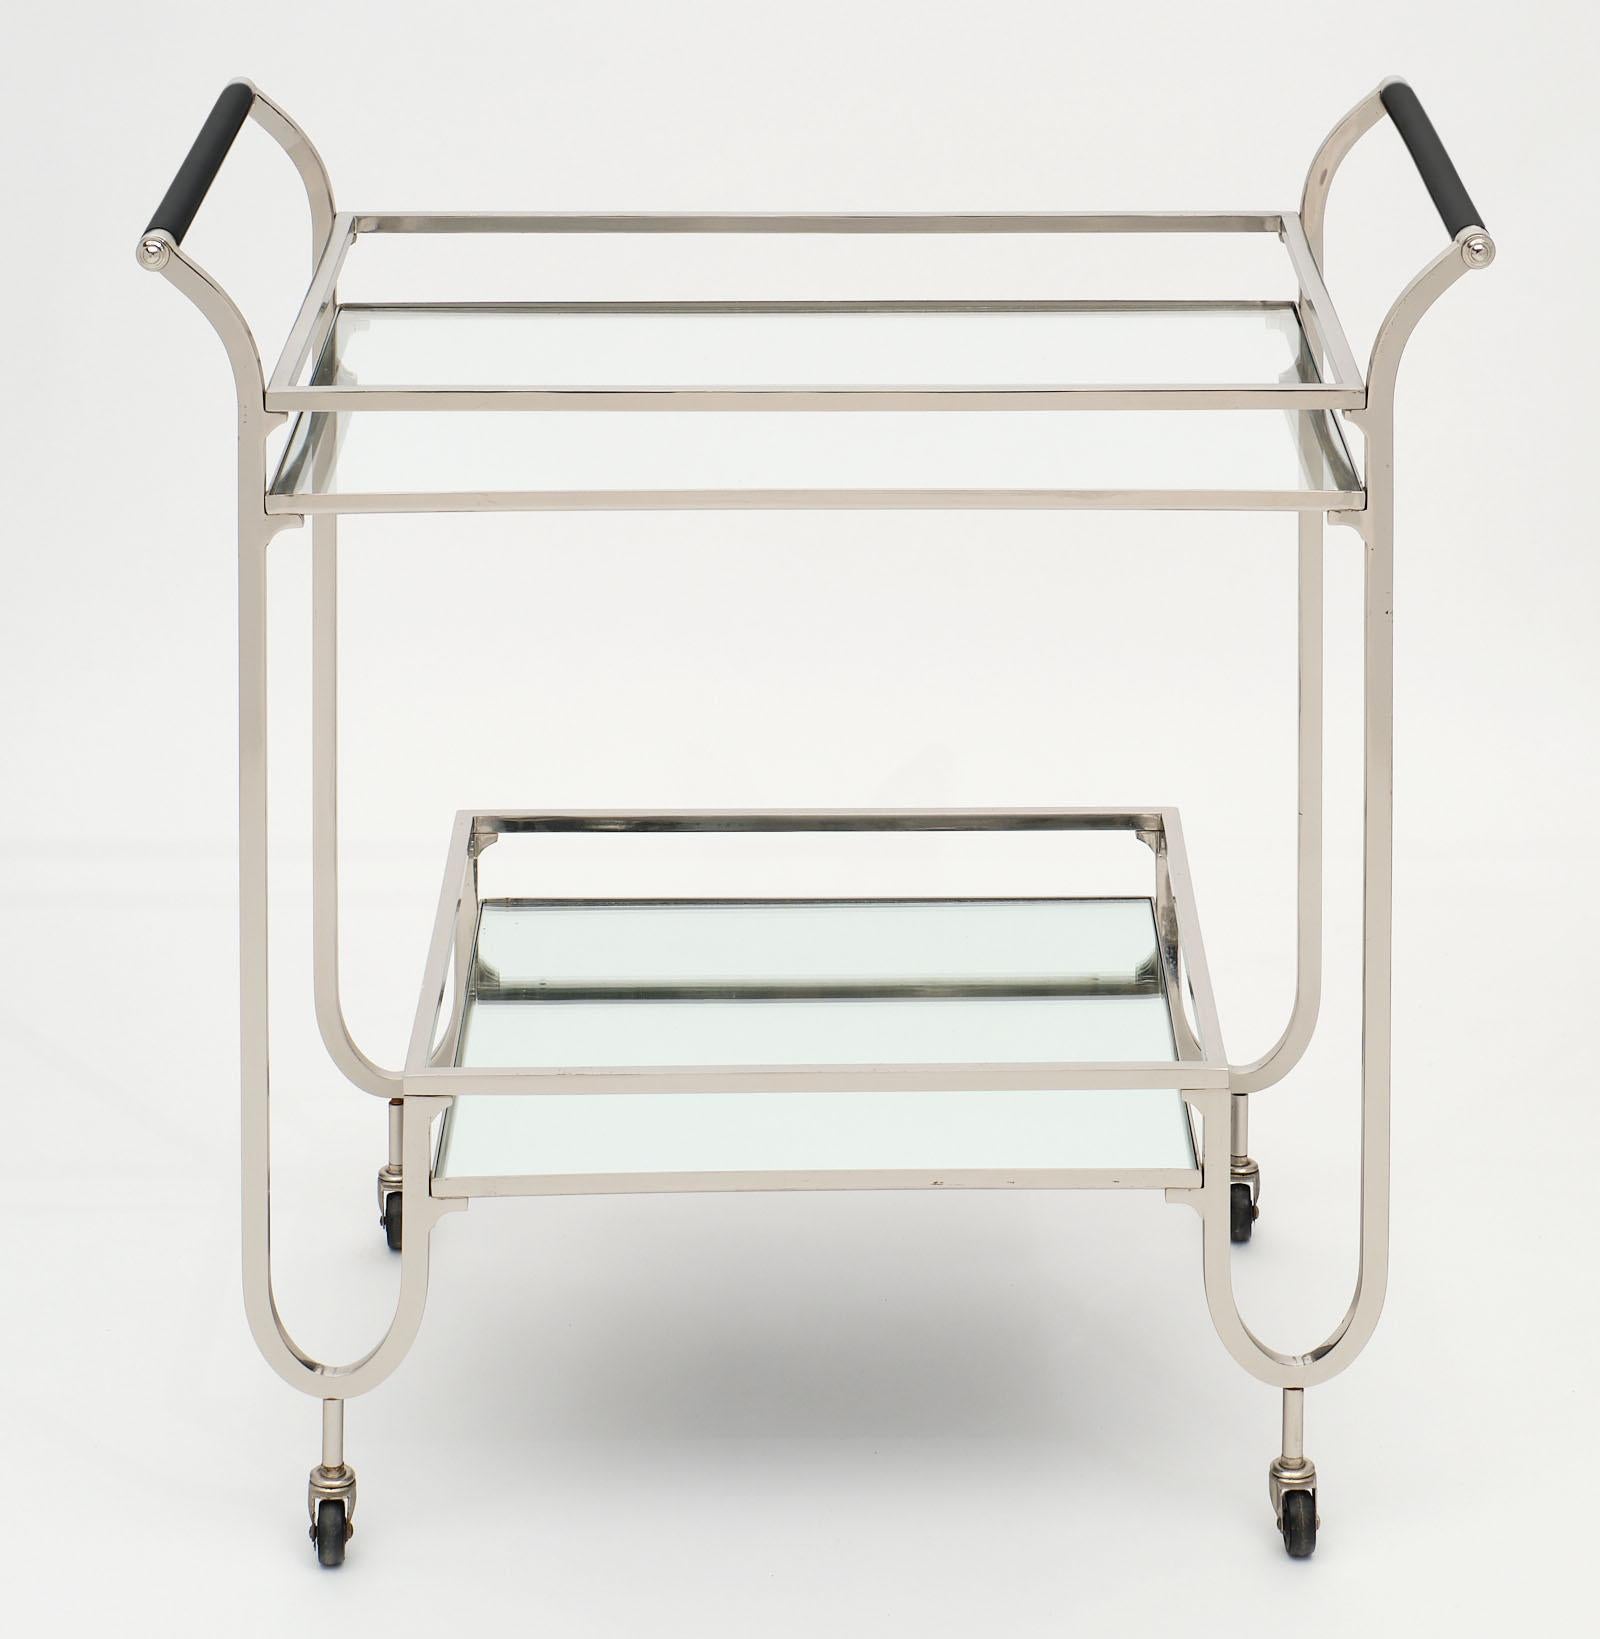 Chrome and ebonized wood bar cart with two tiers. The bottom tier is mirrored, while the top shelf is clear glass. We love the clean lines and proportions of this piece. It is supported by wheels.